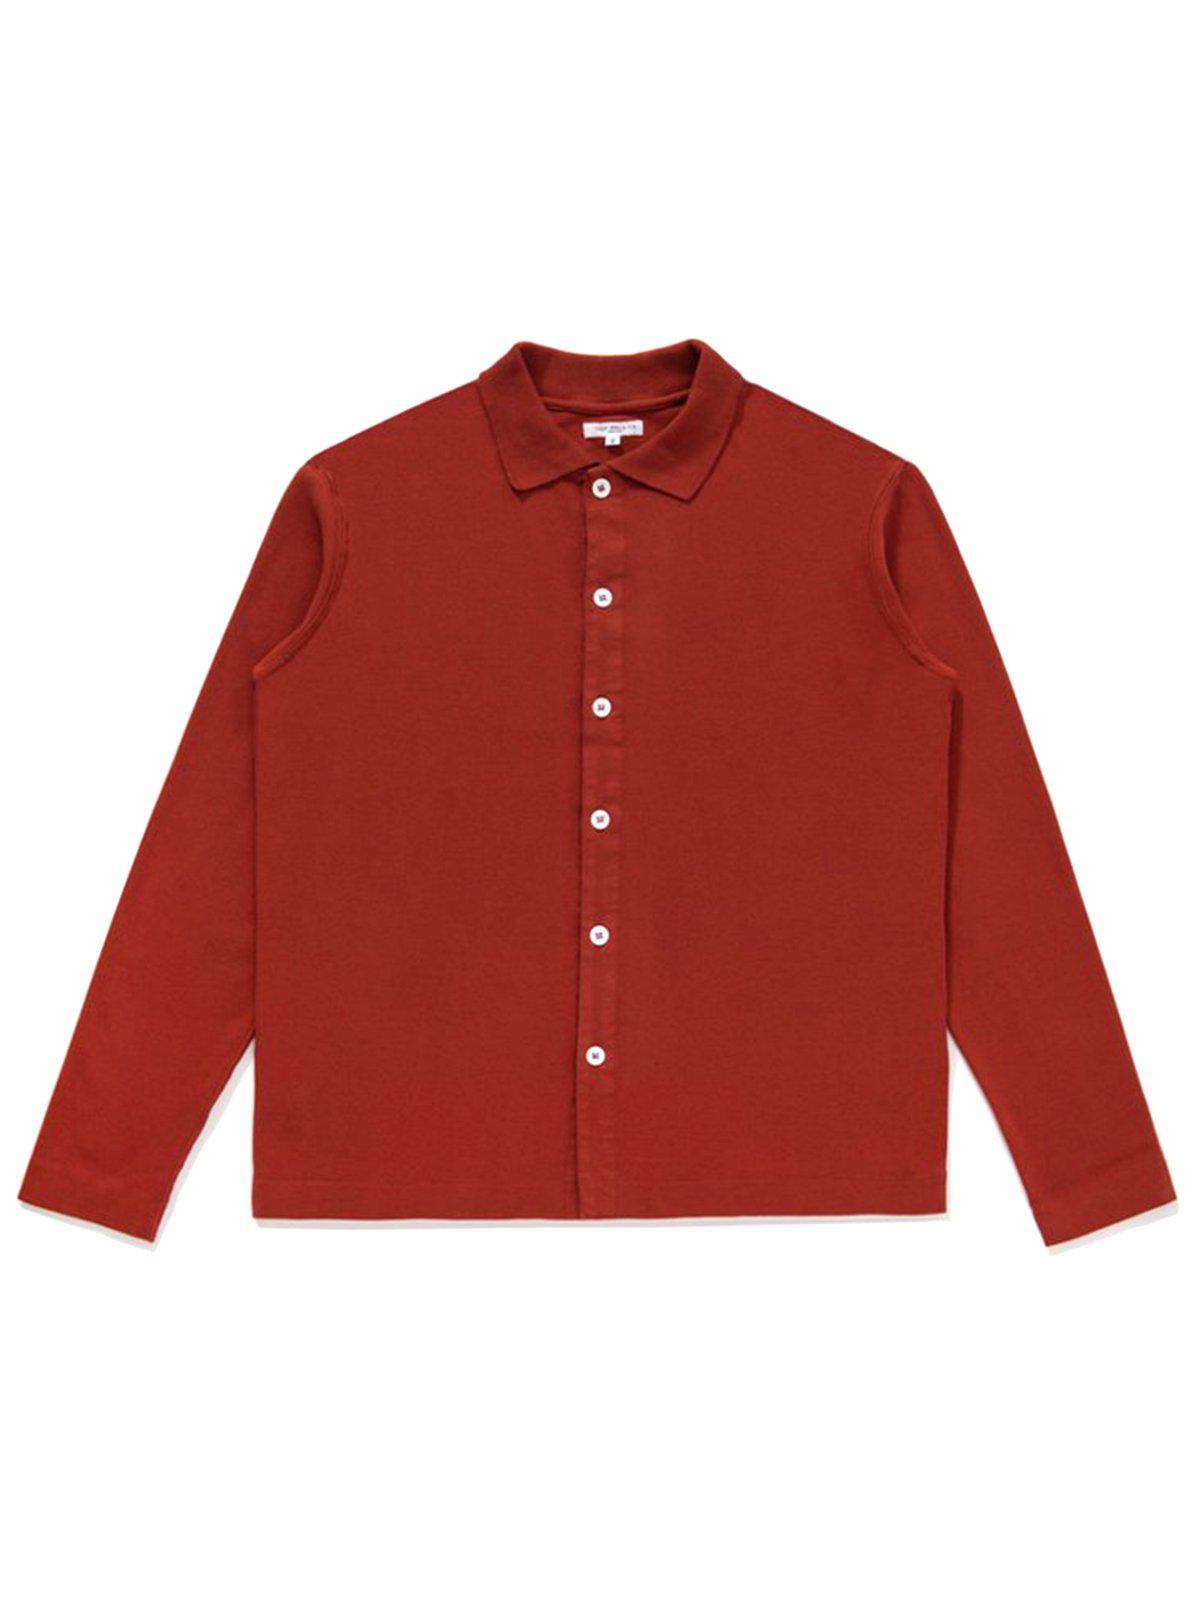 Lady White Co. Long Sleeve Placket Polo Red Ochre - MORE by Morello Indonesia